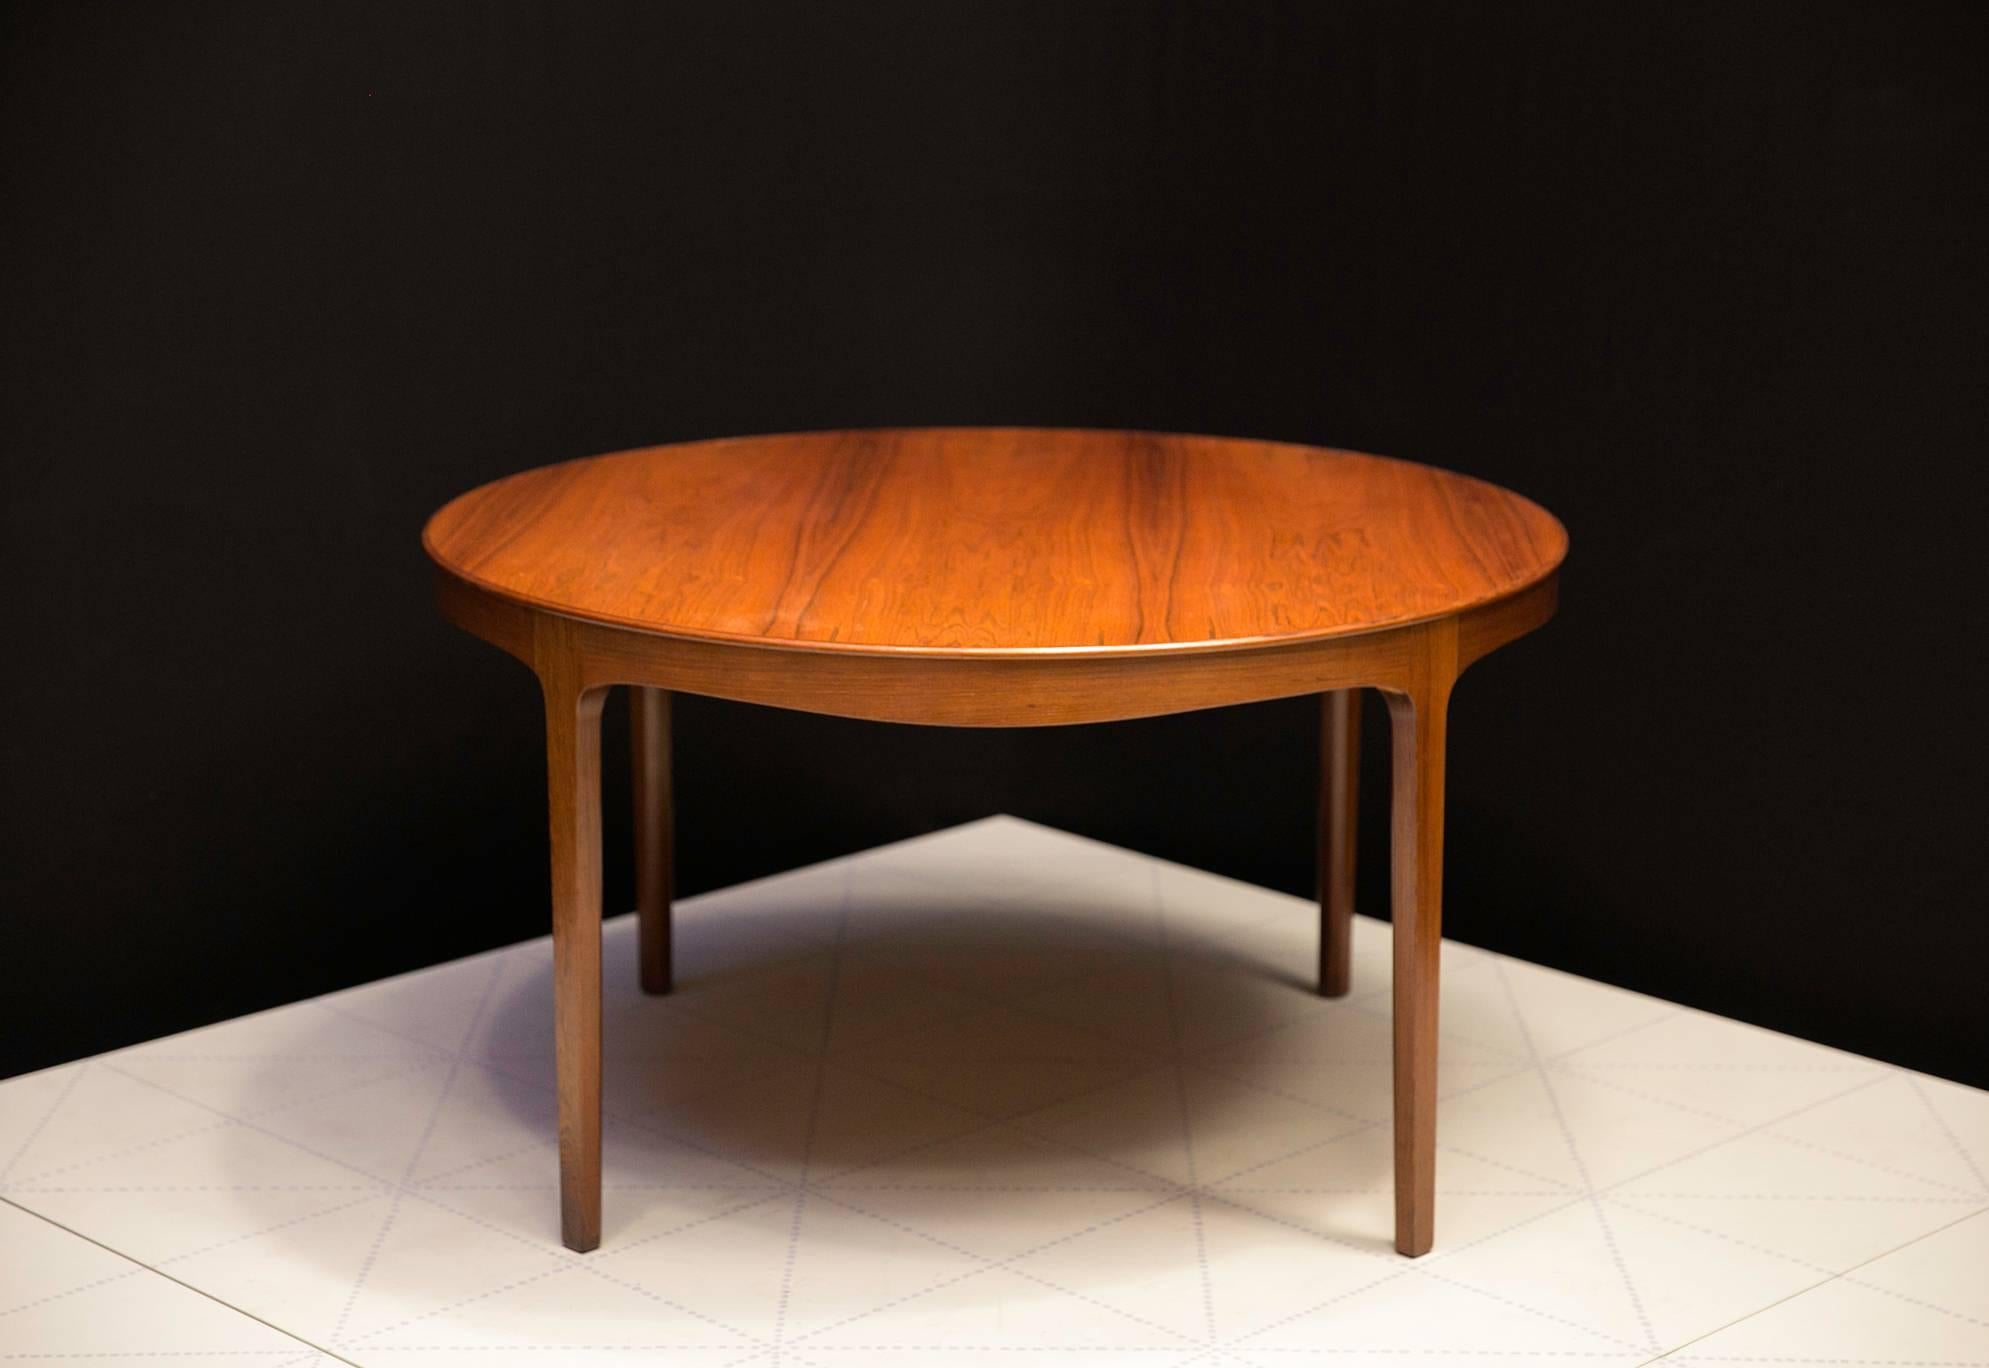 Ole Wanscher's Elegant Brazilian Rosewood Circular Sofa Table with Curved Apron. Made in the 1940s by master cabinetmaker A.J. Iversen (with label on the underside).